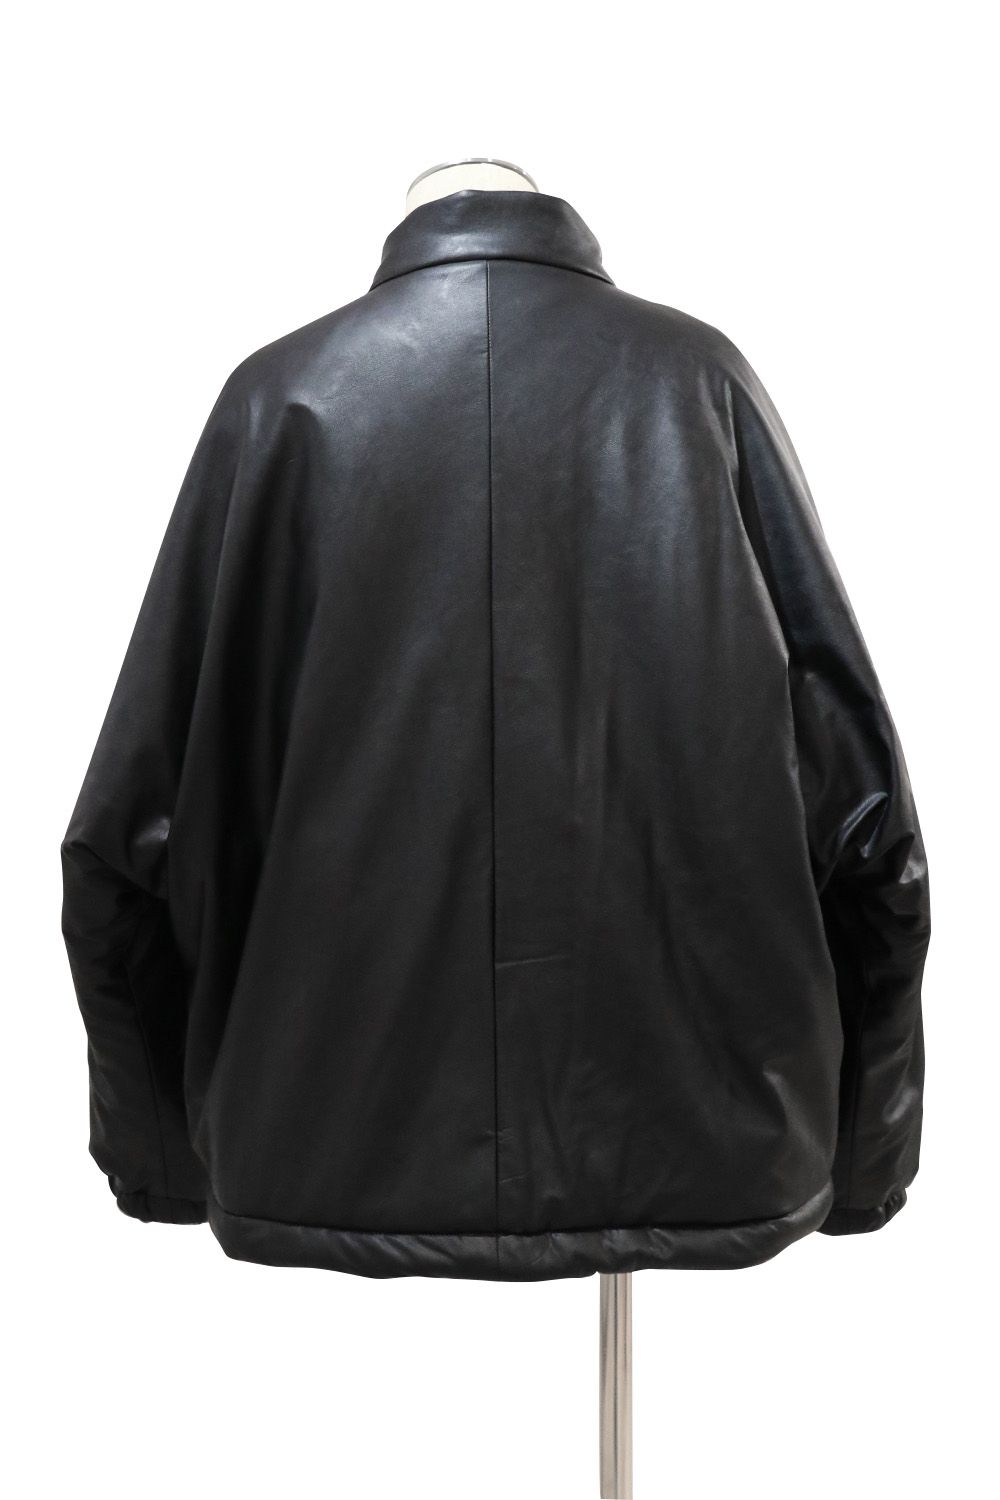 N.HOOLYWOOD - N.HOOLYWOOD COMPILE STAND COLLAR BLOUSON / エヌ ...